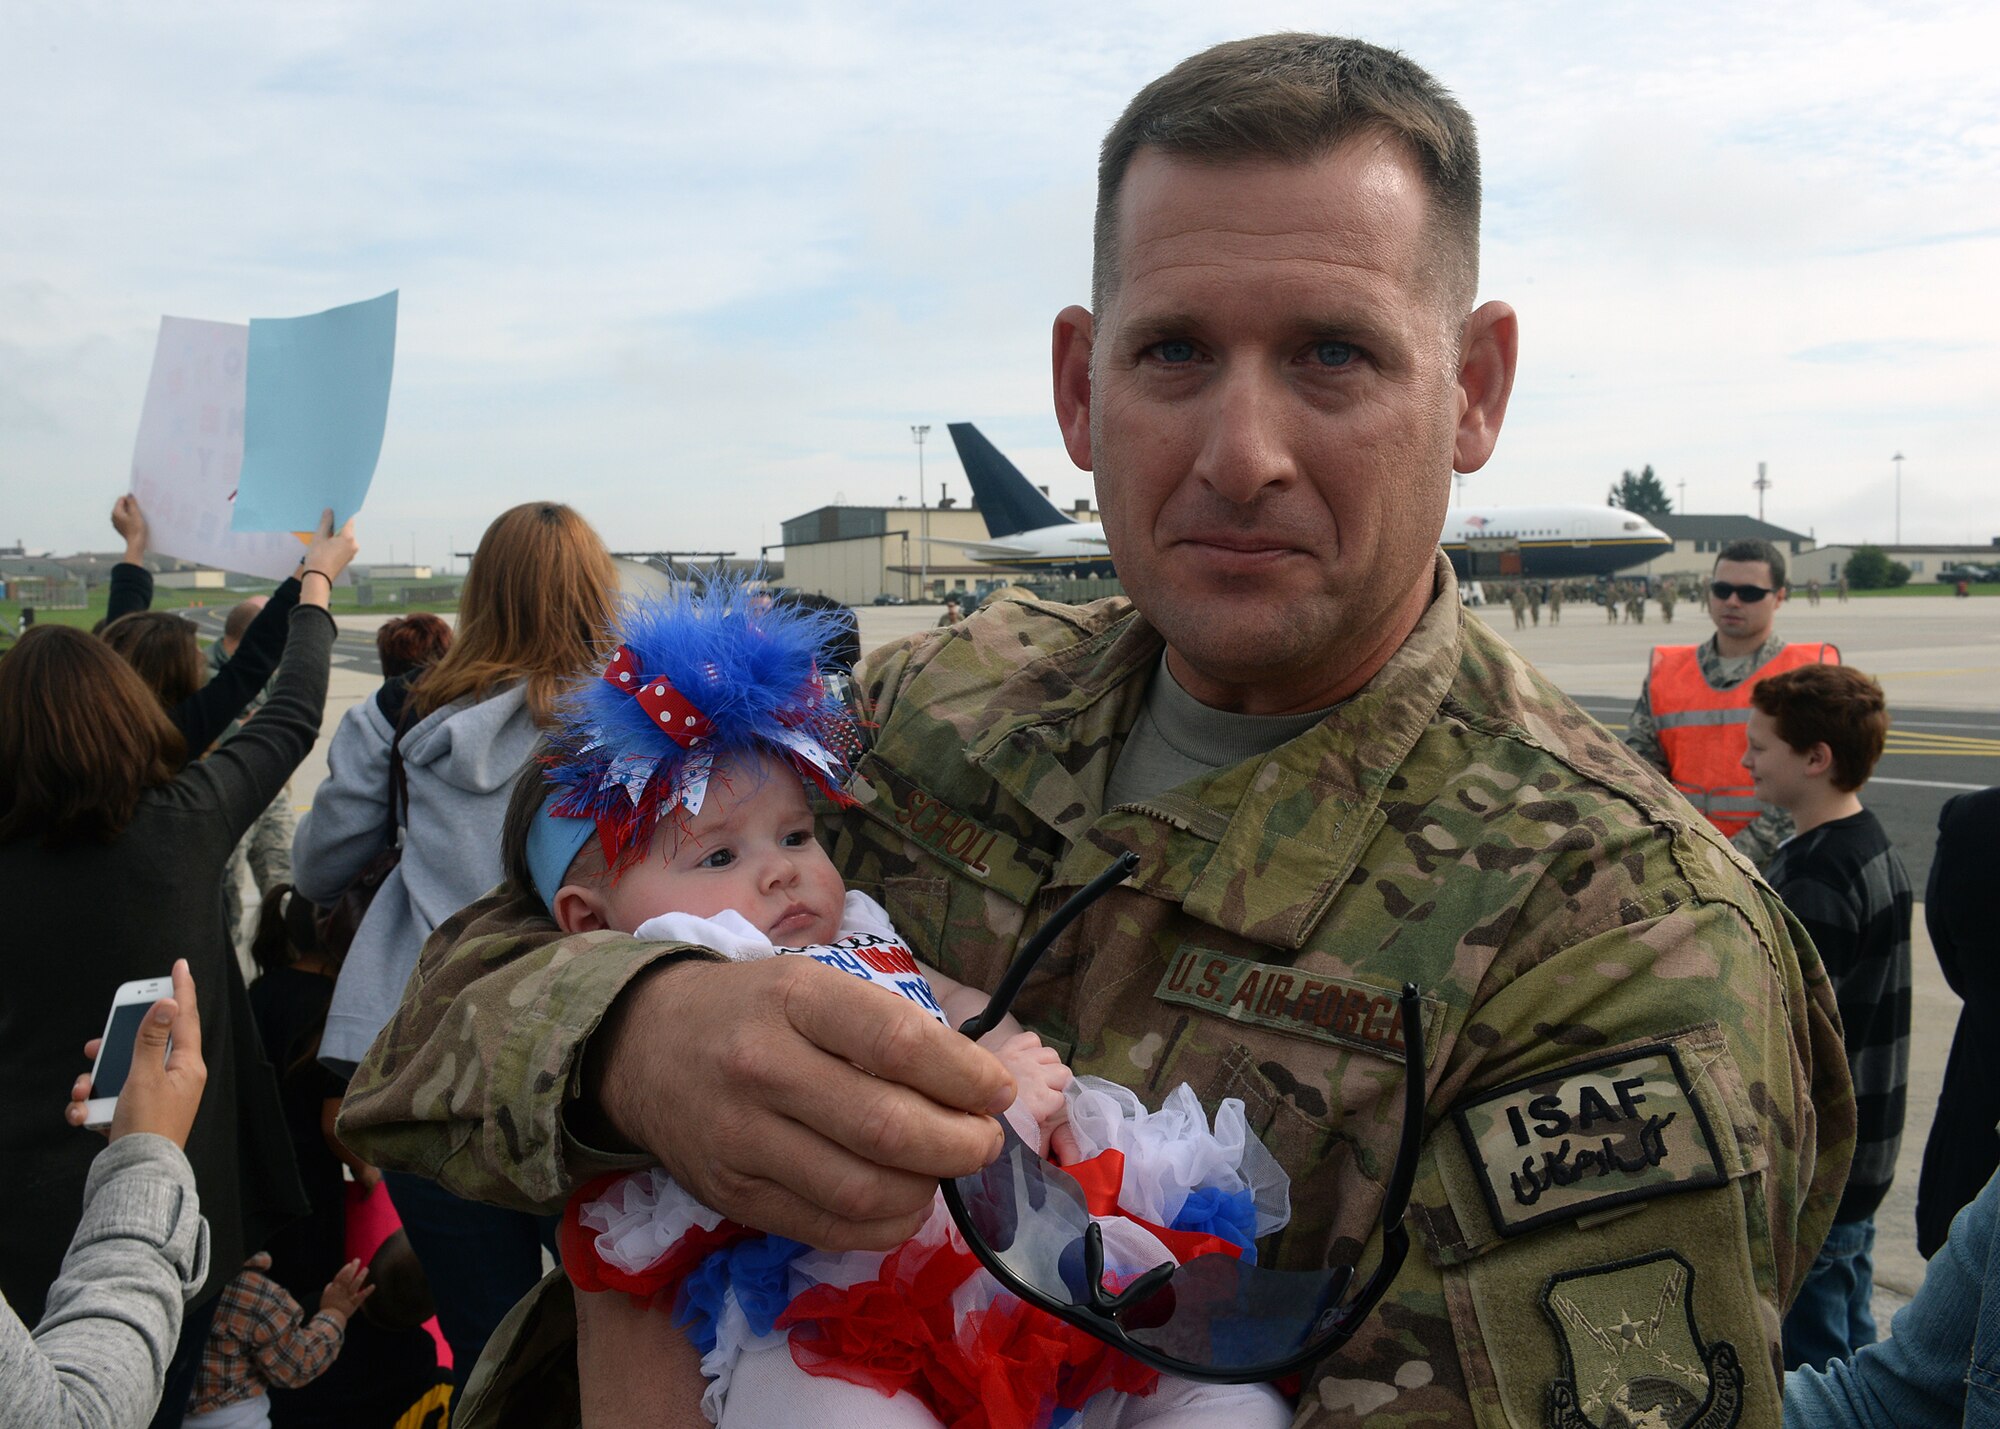 SPANGDAHLEM AIR BASE, Germany -- U.S. Air Force Senior Master Sgt. Todd Scholl, 52nd Aircraft Maintenance Squadron, holds his daughter Evelyn for the first time here Sept. 21, 2013. Evelyn was born 86 days ago while Scholl was still in southwest Asia supporting Operation Enduring Freedom. (U.S. Air Force photo by Staff Sgt. Daryl Knee/Released)